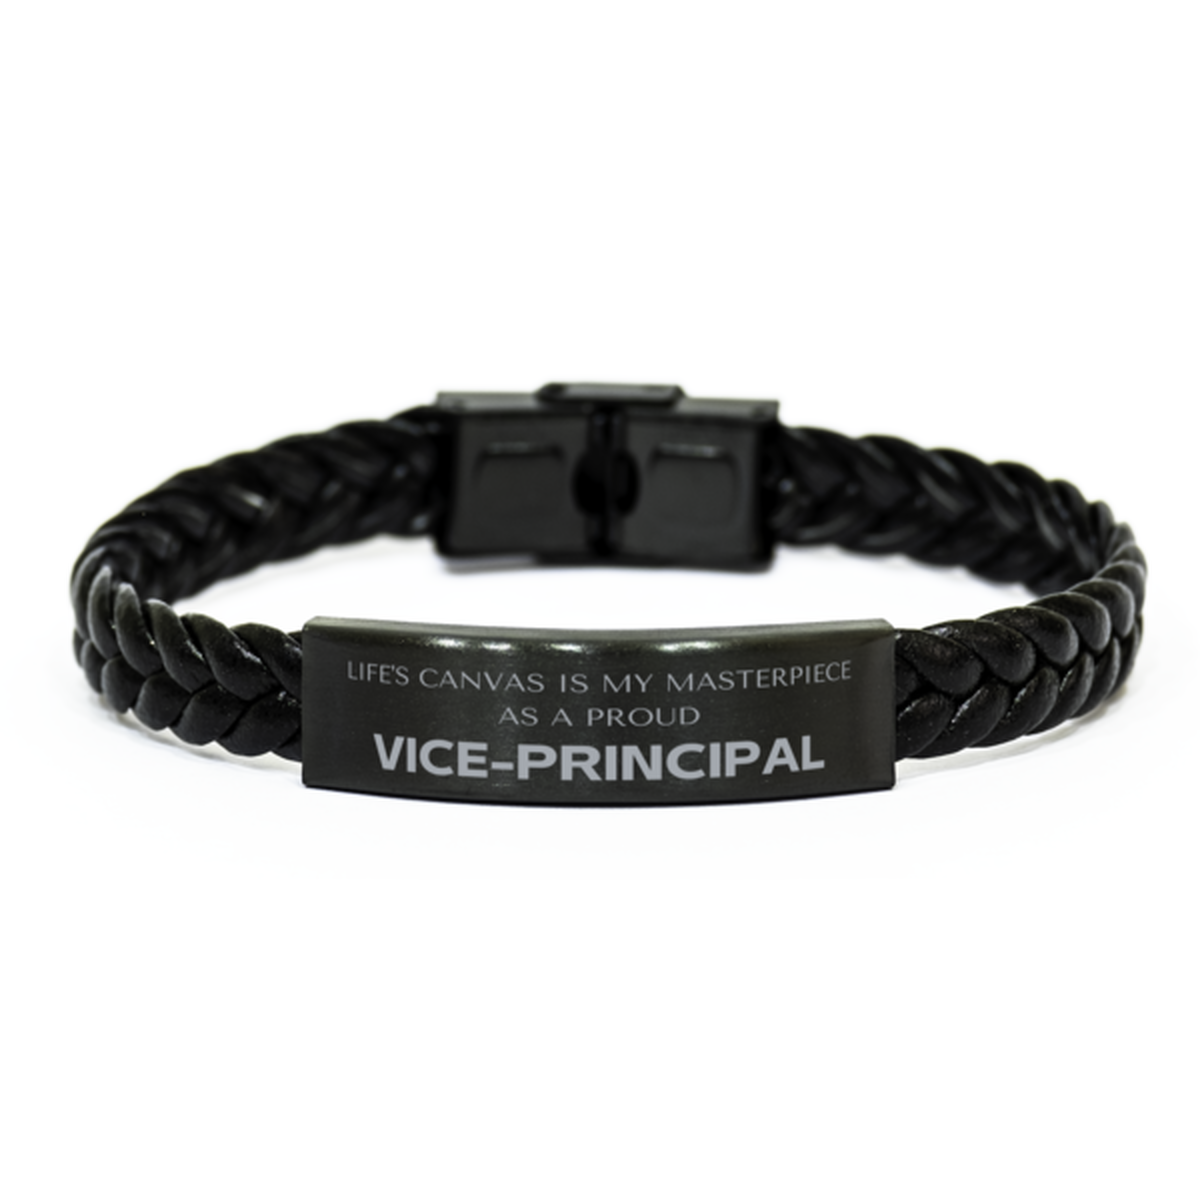 Proud Vice-principal Gifts, Life's canvas is my masterpiece, Epic Birthday Christmas Unique Braided Leather Bracelet For Vice-principal, Coworkers, Men, Women, Friends